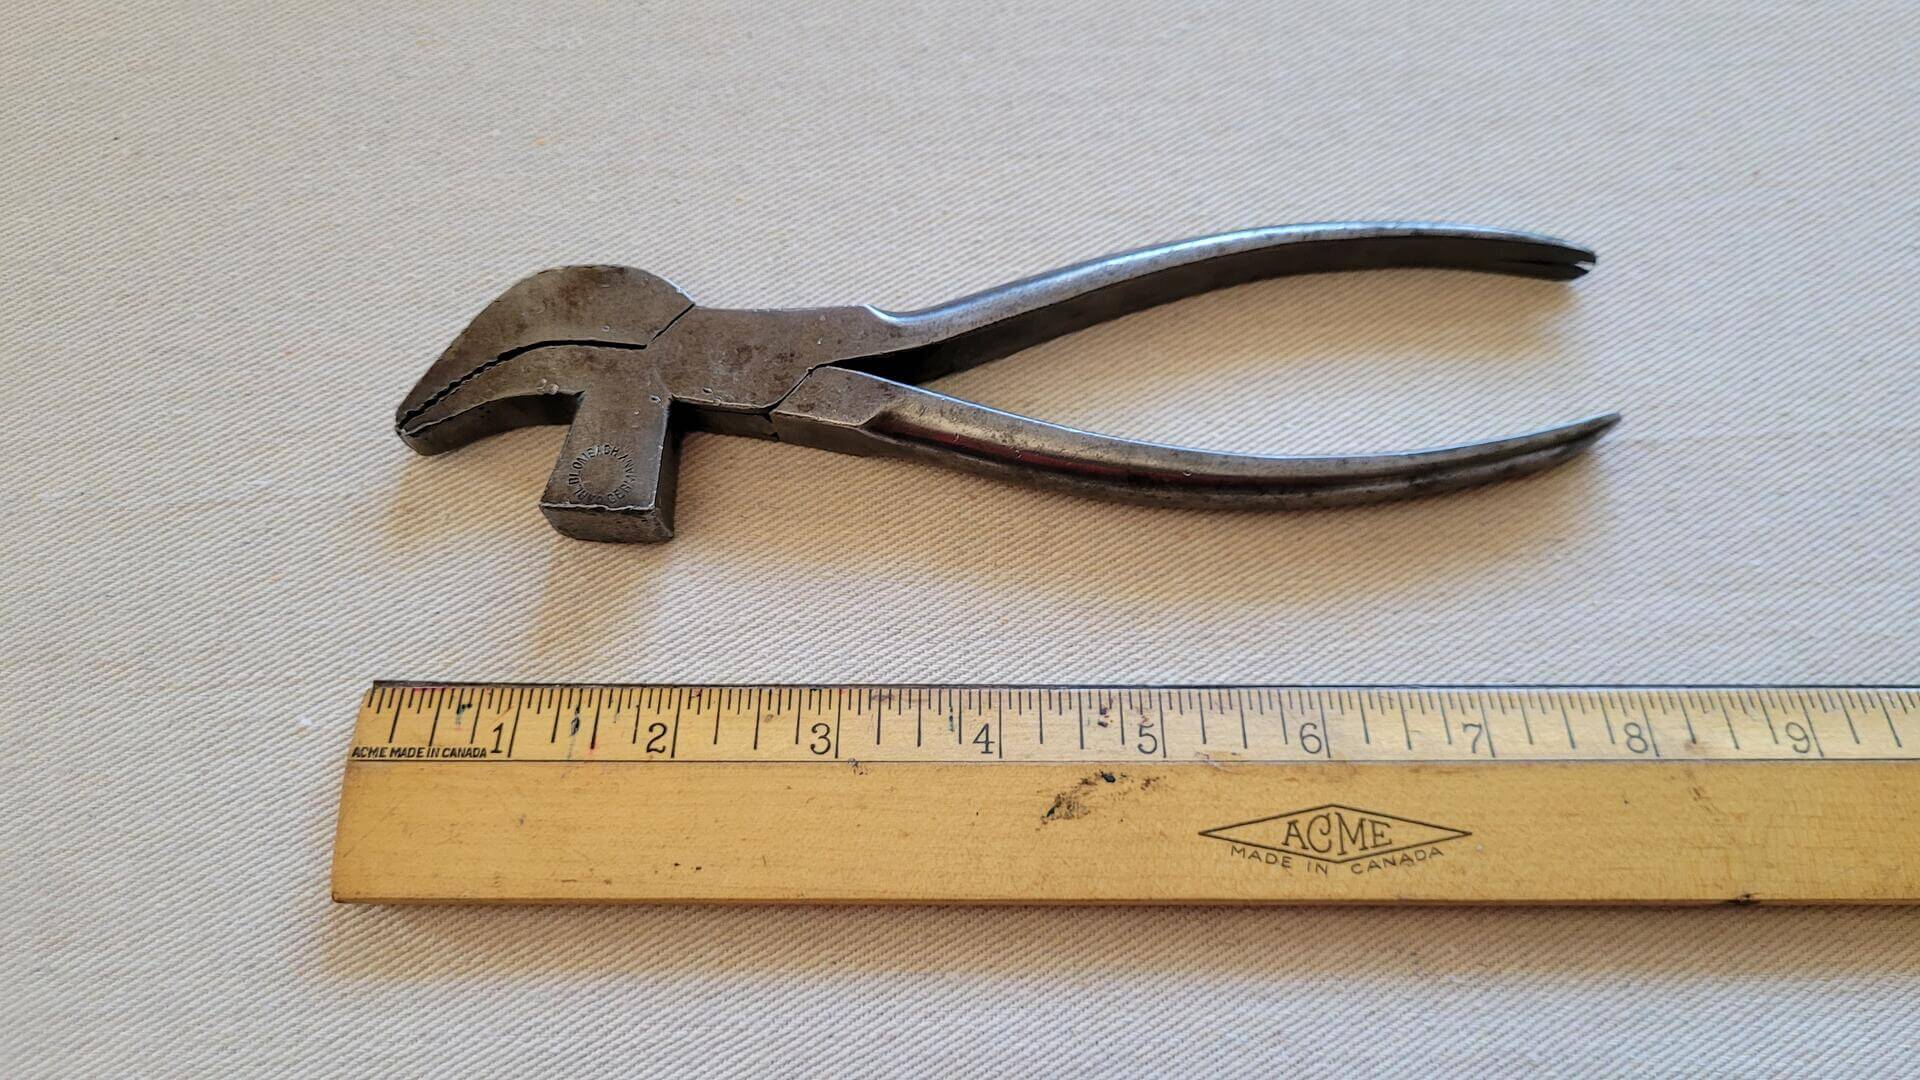 Rare vintage Carl Blombach forged cobbler lasting pliers with hammer 8 inches long. Primitive and antique made in Germany collectible shoe maker leather working hand tool